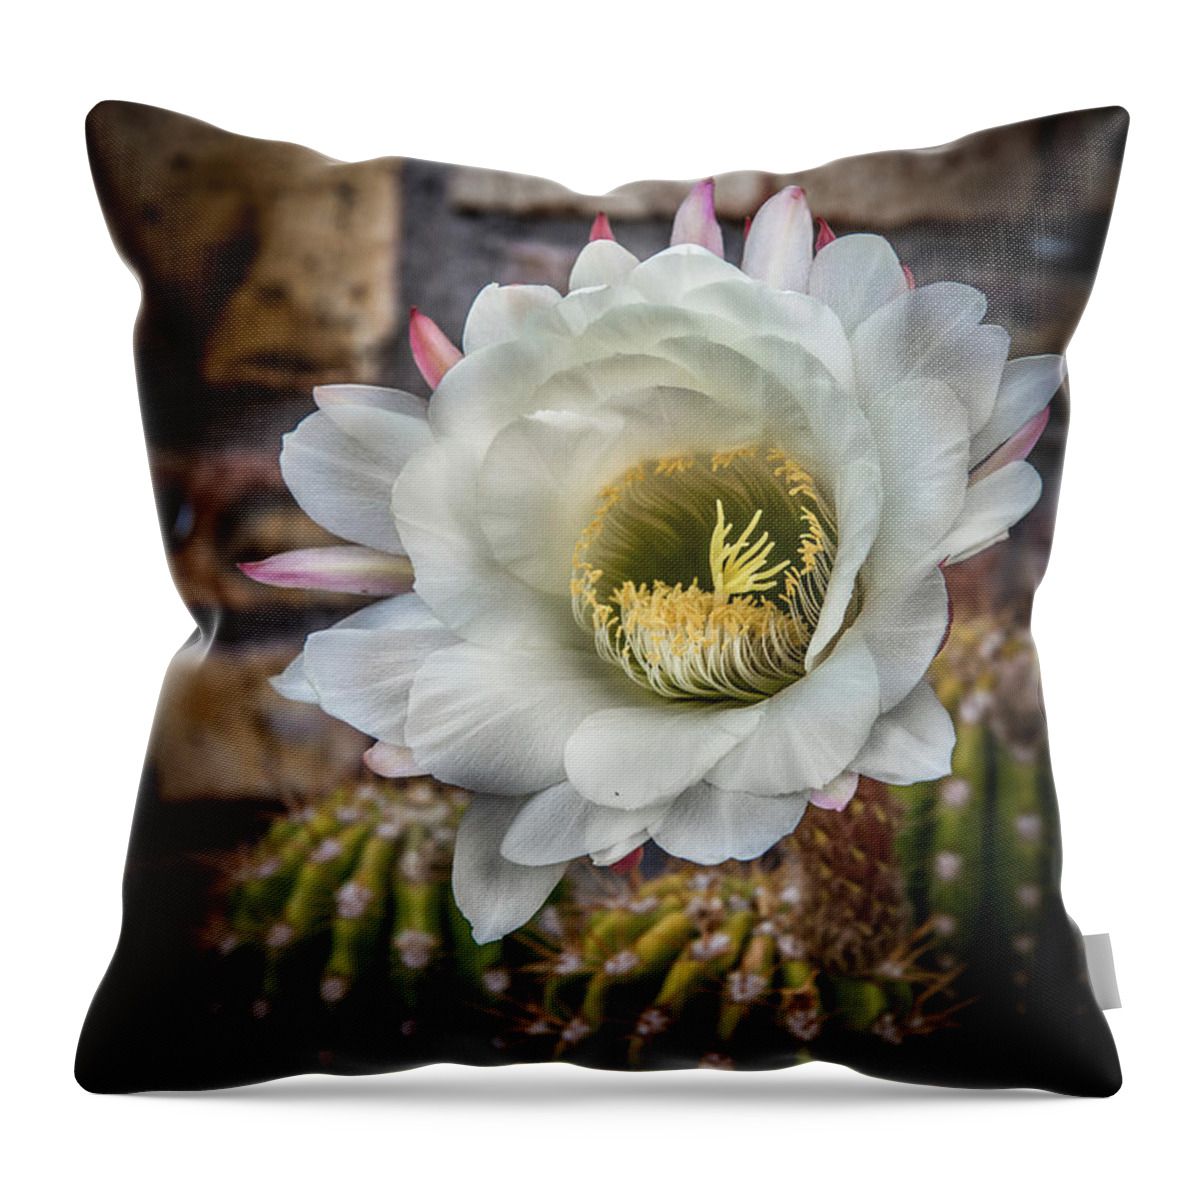 Argentine Giant Throw Pillow featuring the photograph The White Beauty by Robert Bales